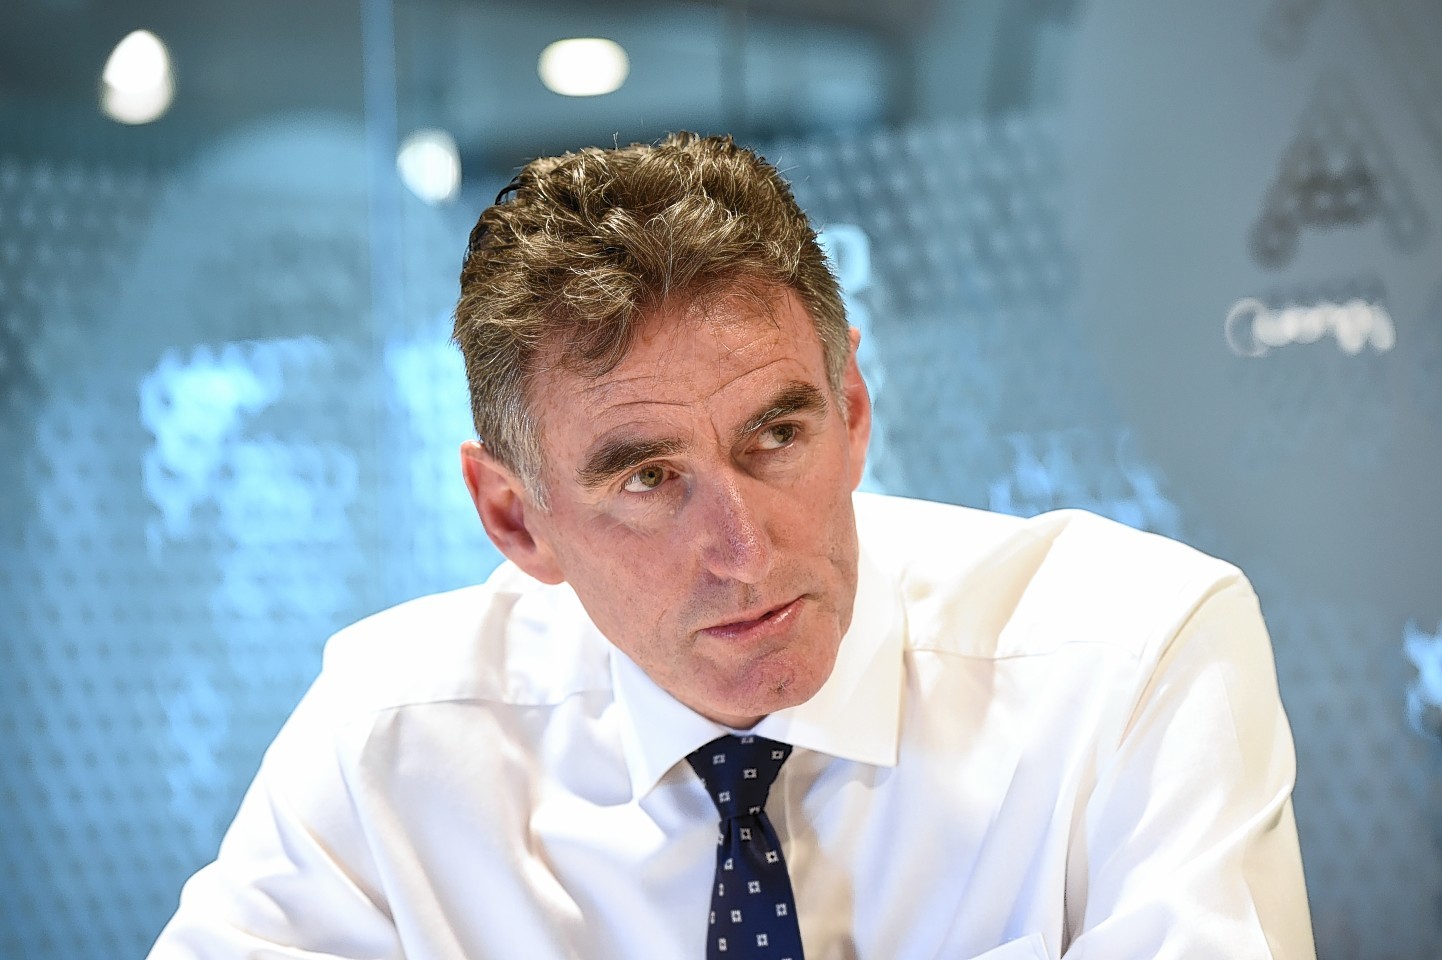 RBS chief executive, Ross McEwen, acknowledged some customers had gone through a "traumatic and painful experience."